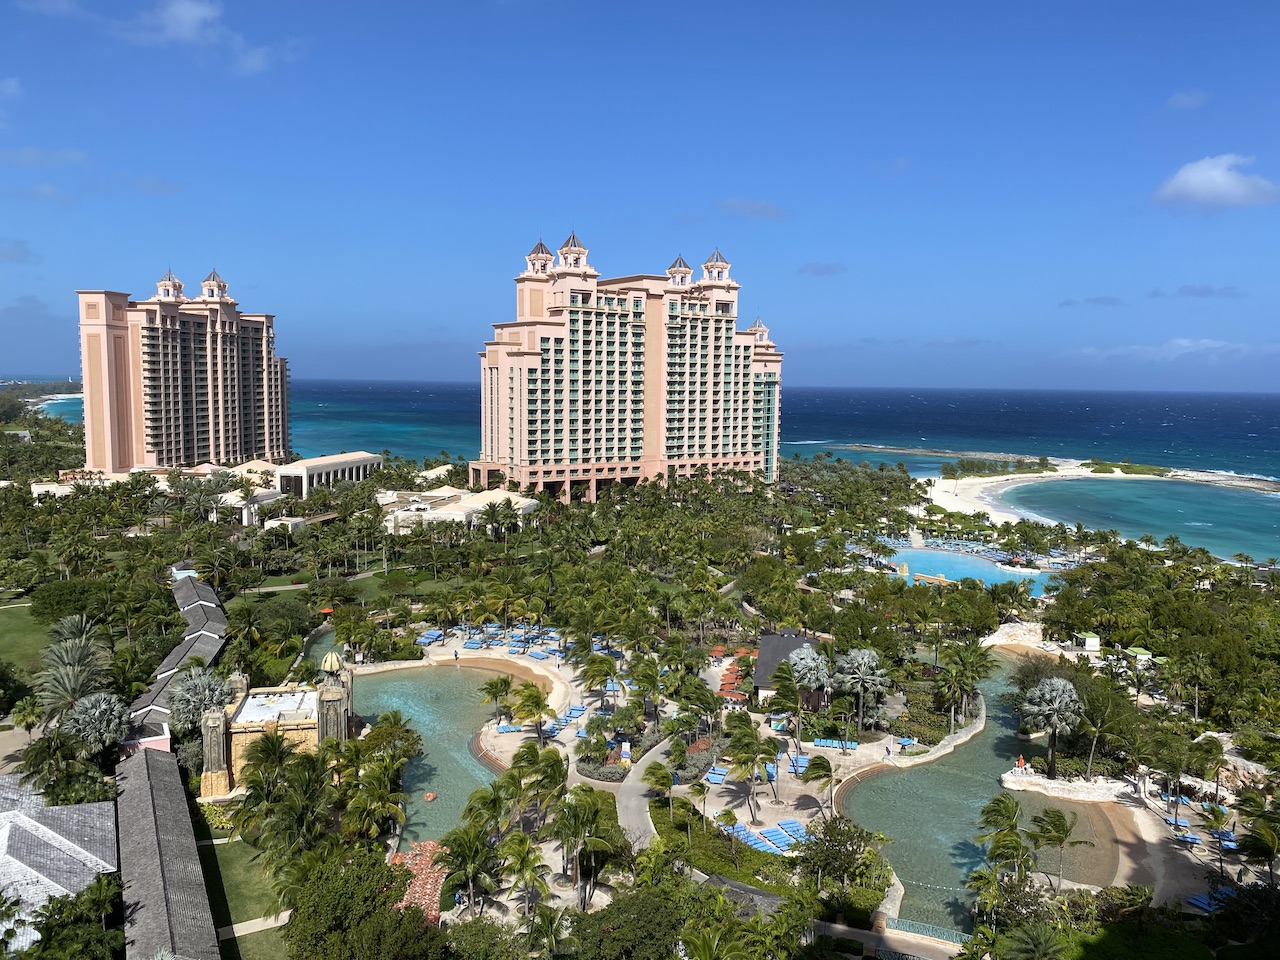 Atlantis Bahamas Resort a place to unwind and relax